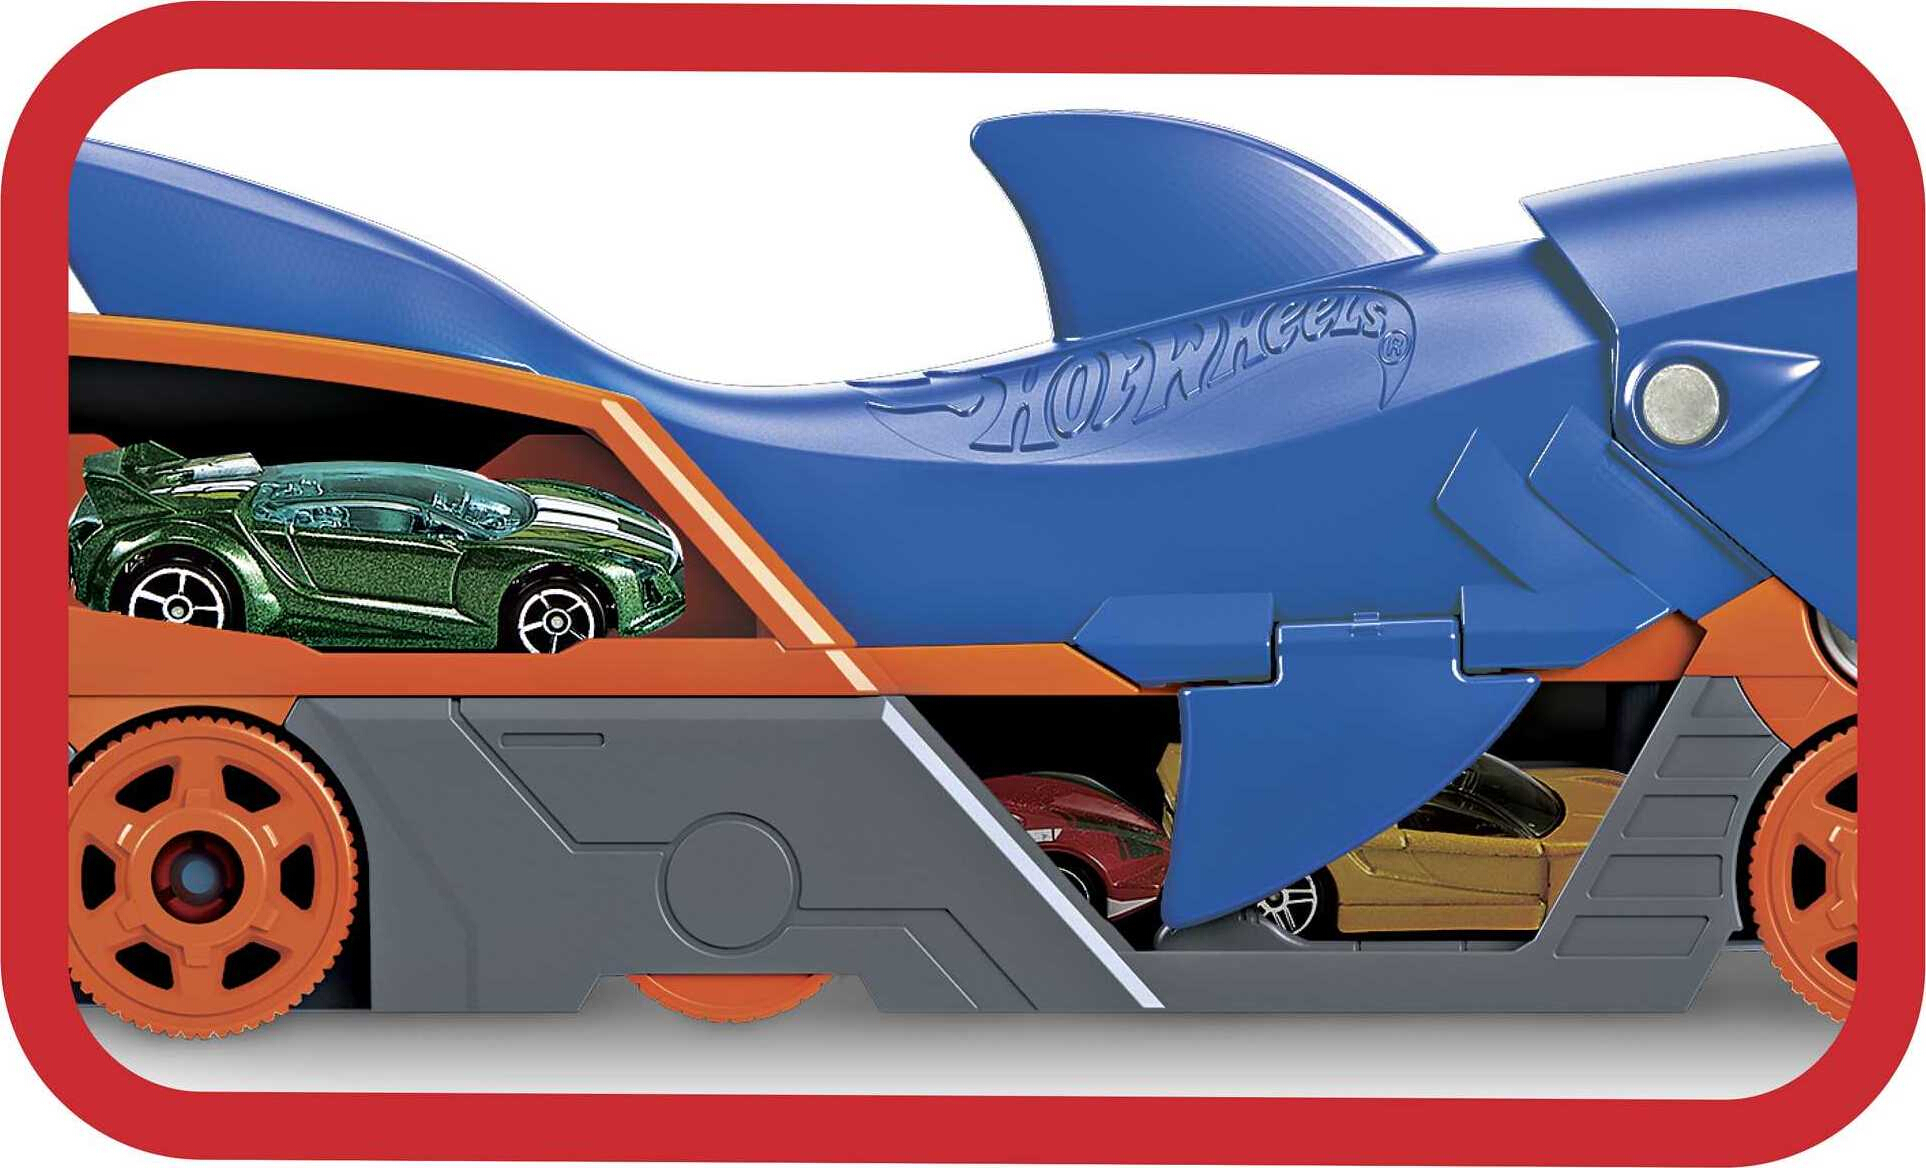 Hot Wheels Shark Chomp Transporter Playset with 1 Toy Car in 1:64 Scale - image 4 of 7